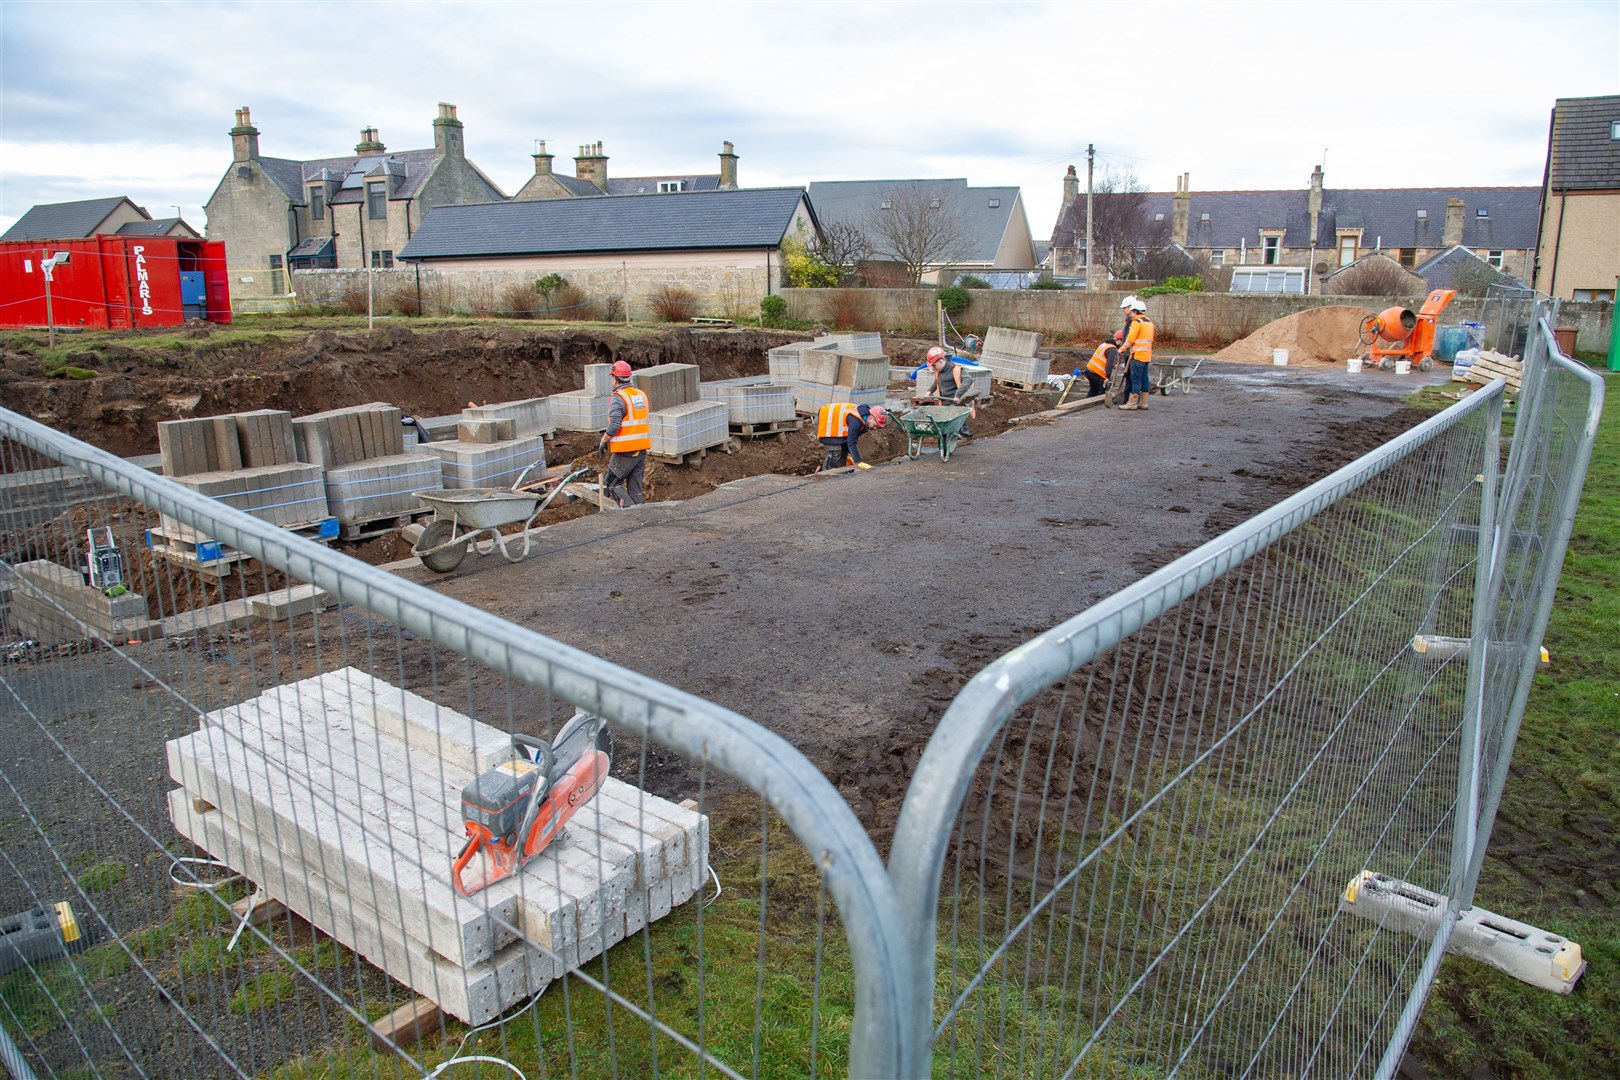 Work on the new pavilion project at Marine Park in Lossiemouth, which was boosted by £220,000 from Moray LEADER. Picture: Daniel Forsyth.